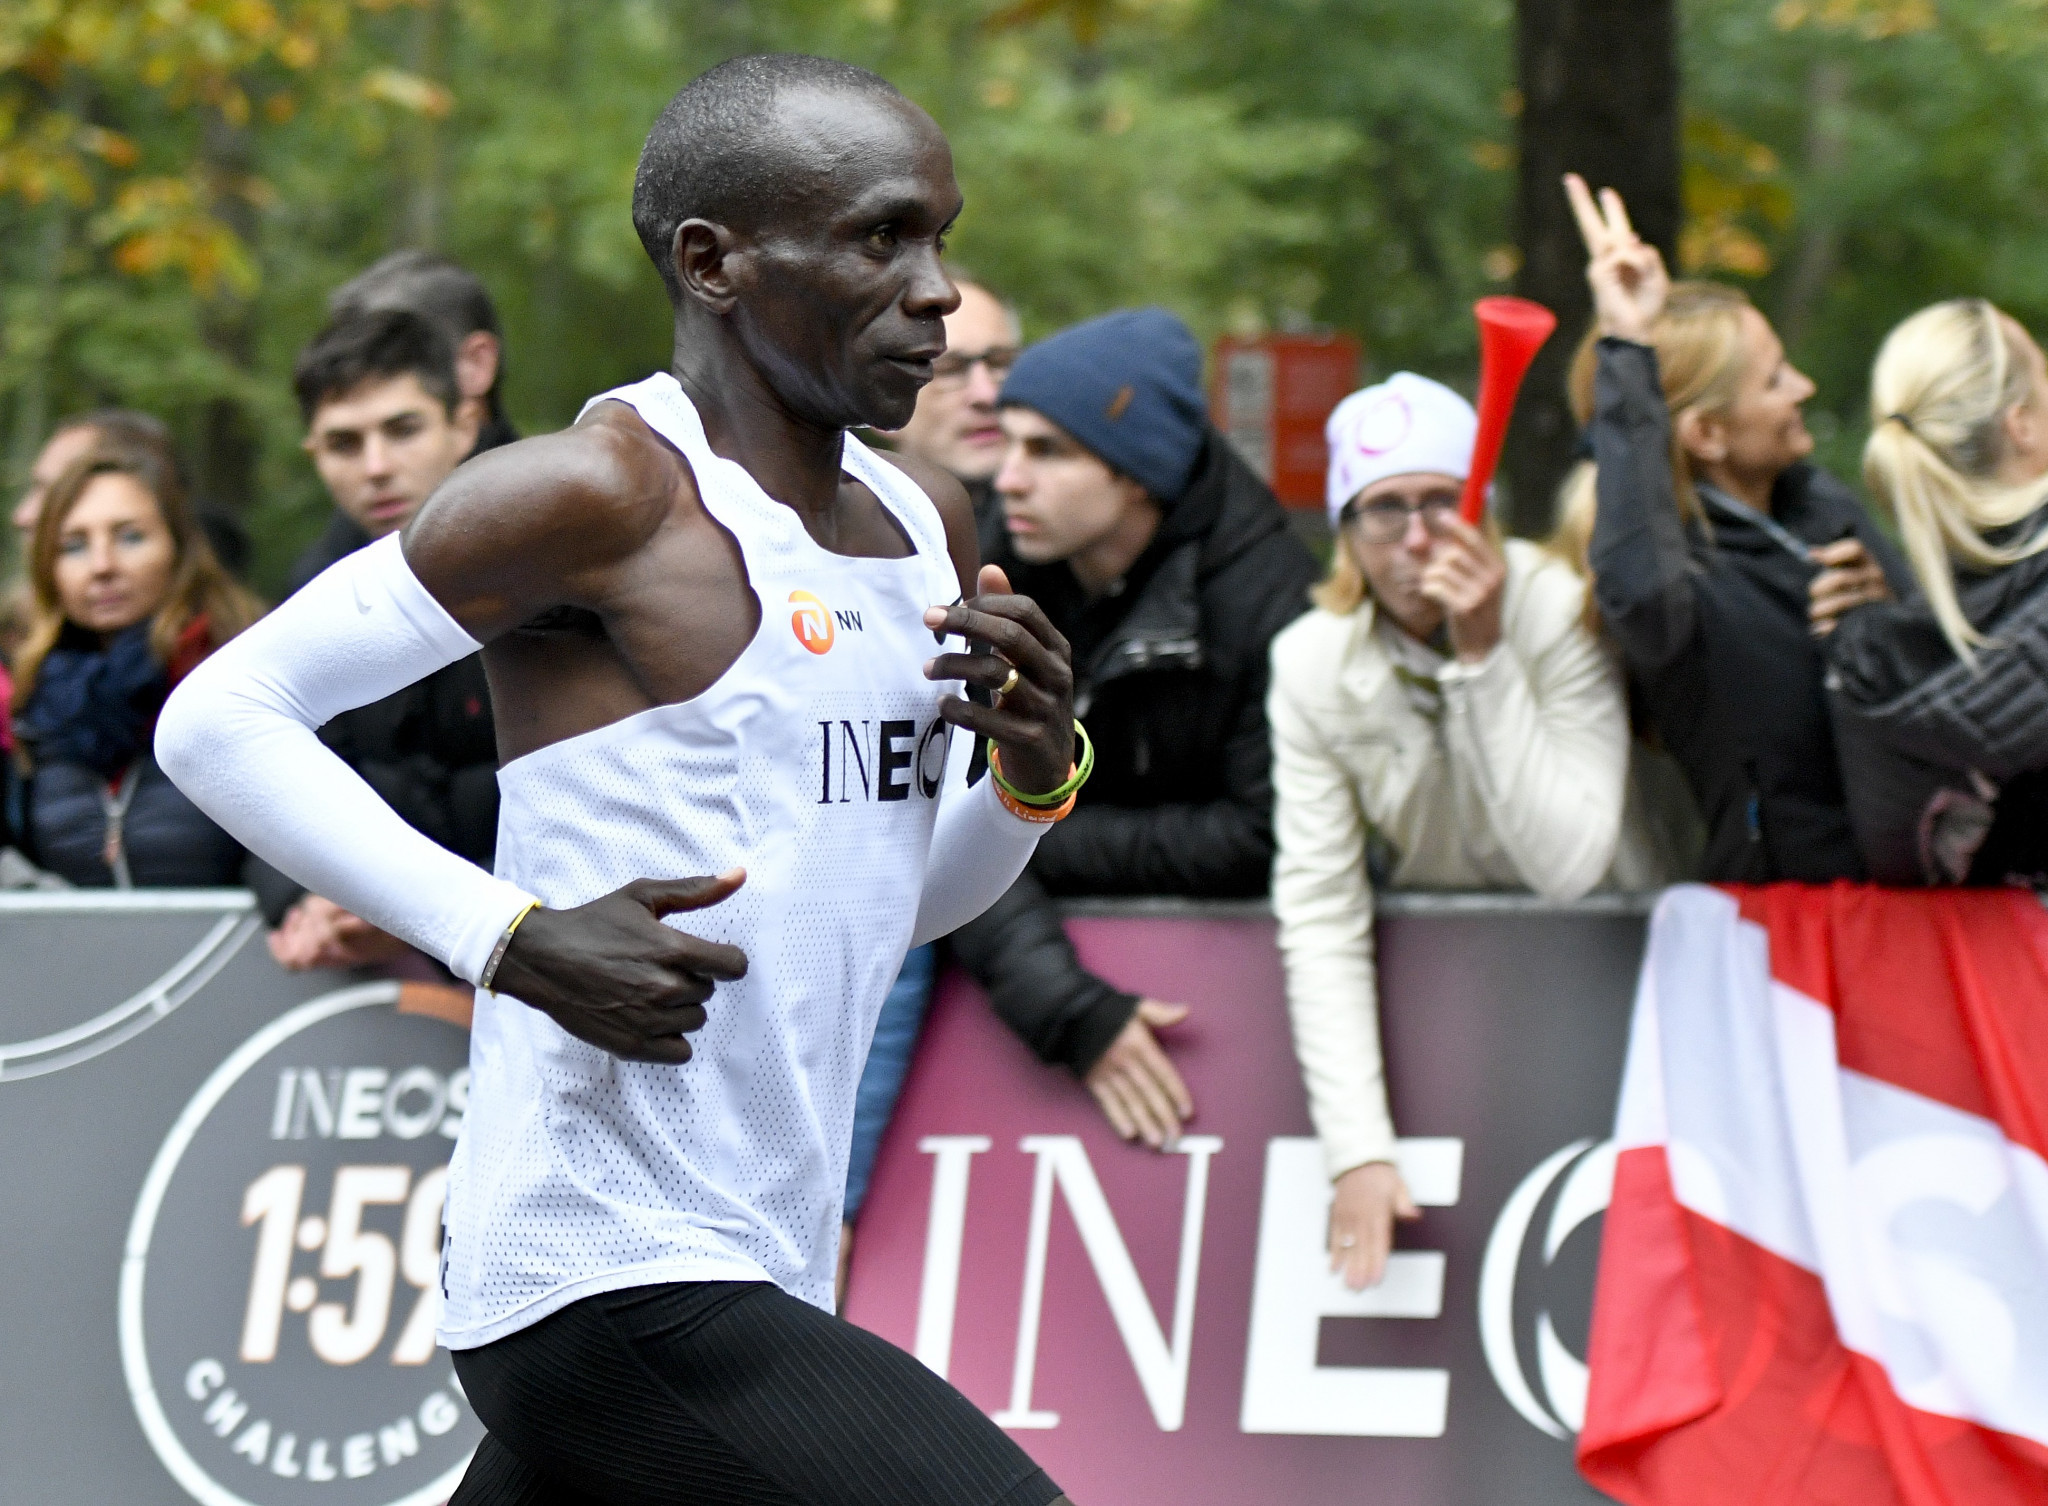 Eliud Kipchoge chases history in Vienna 